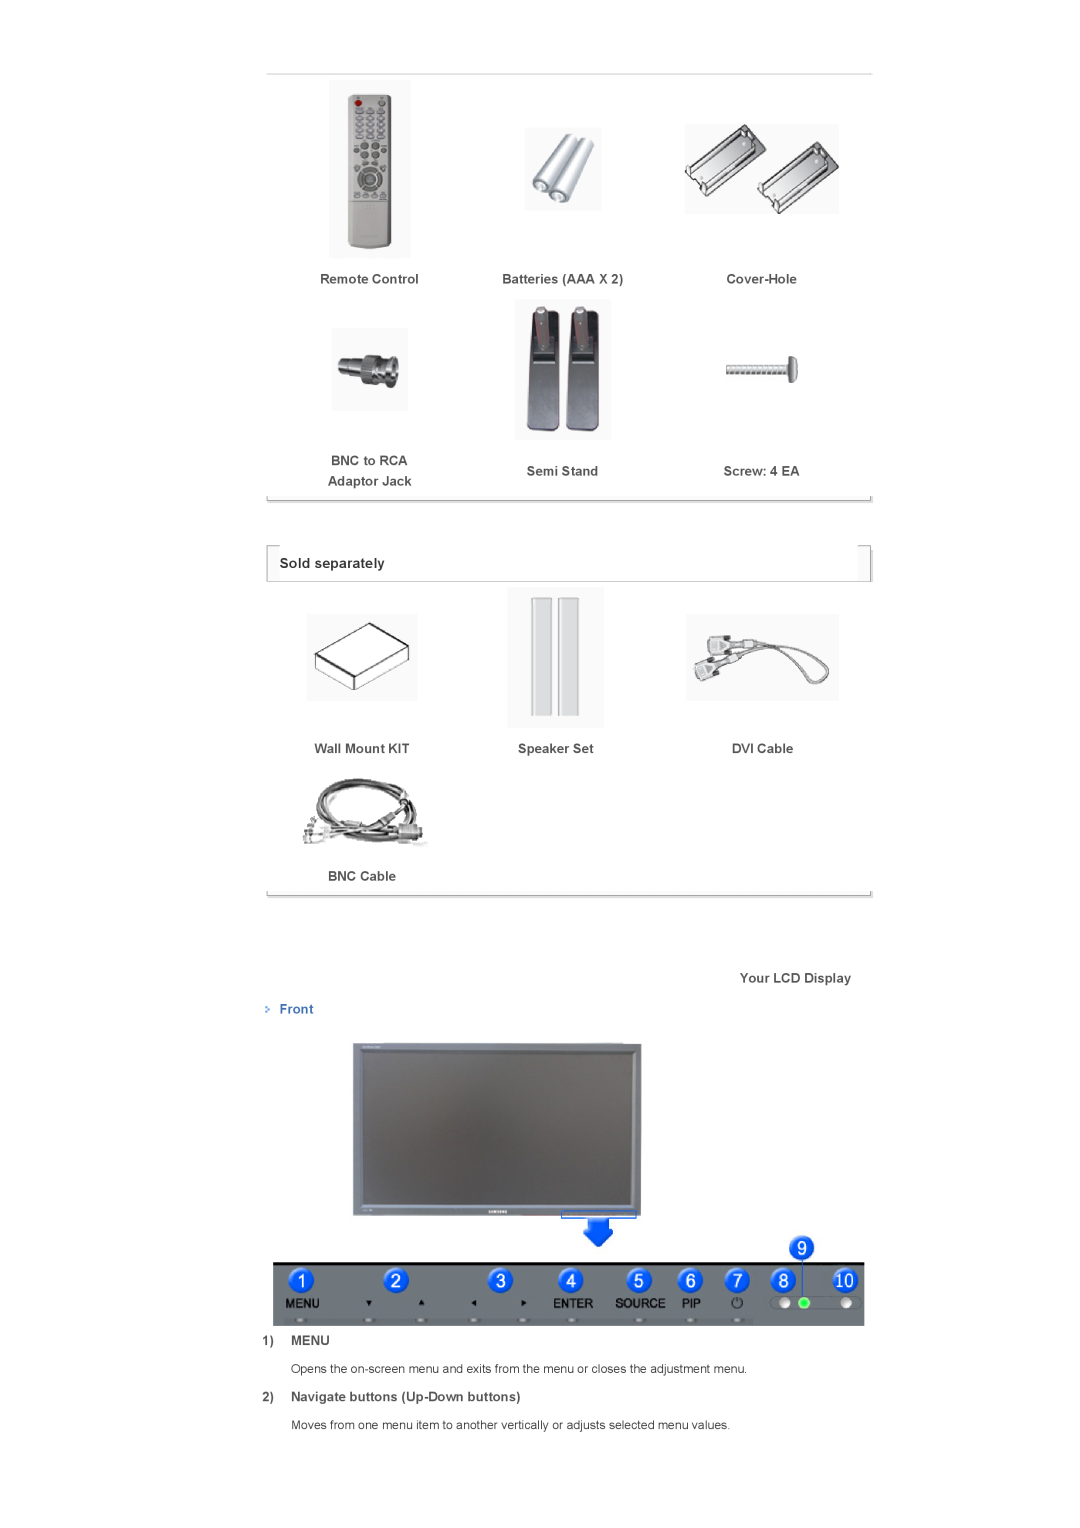 Samsung 400DX Remote Control, Batteries AAA X, Semi Stand, Wall Mount KIT, Speaker Set, BNC Cable Your LCD Display, Front 